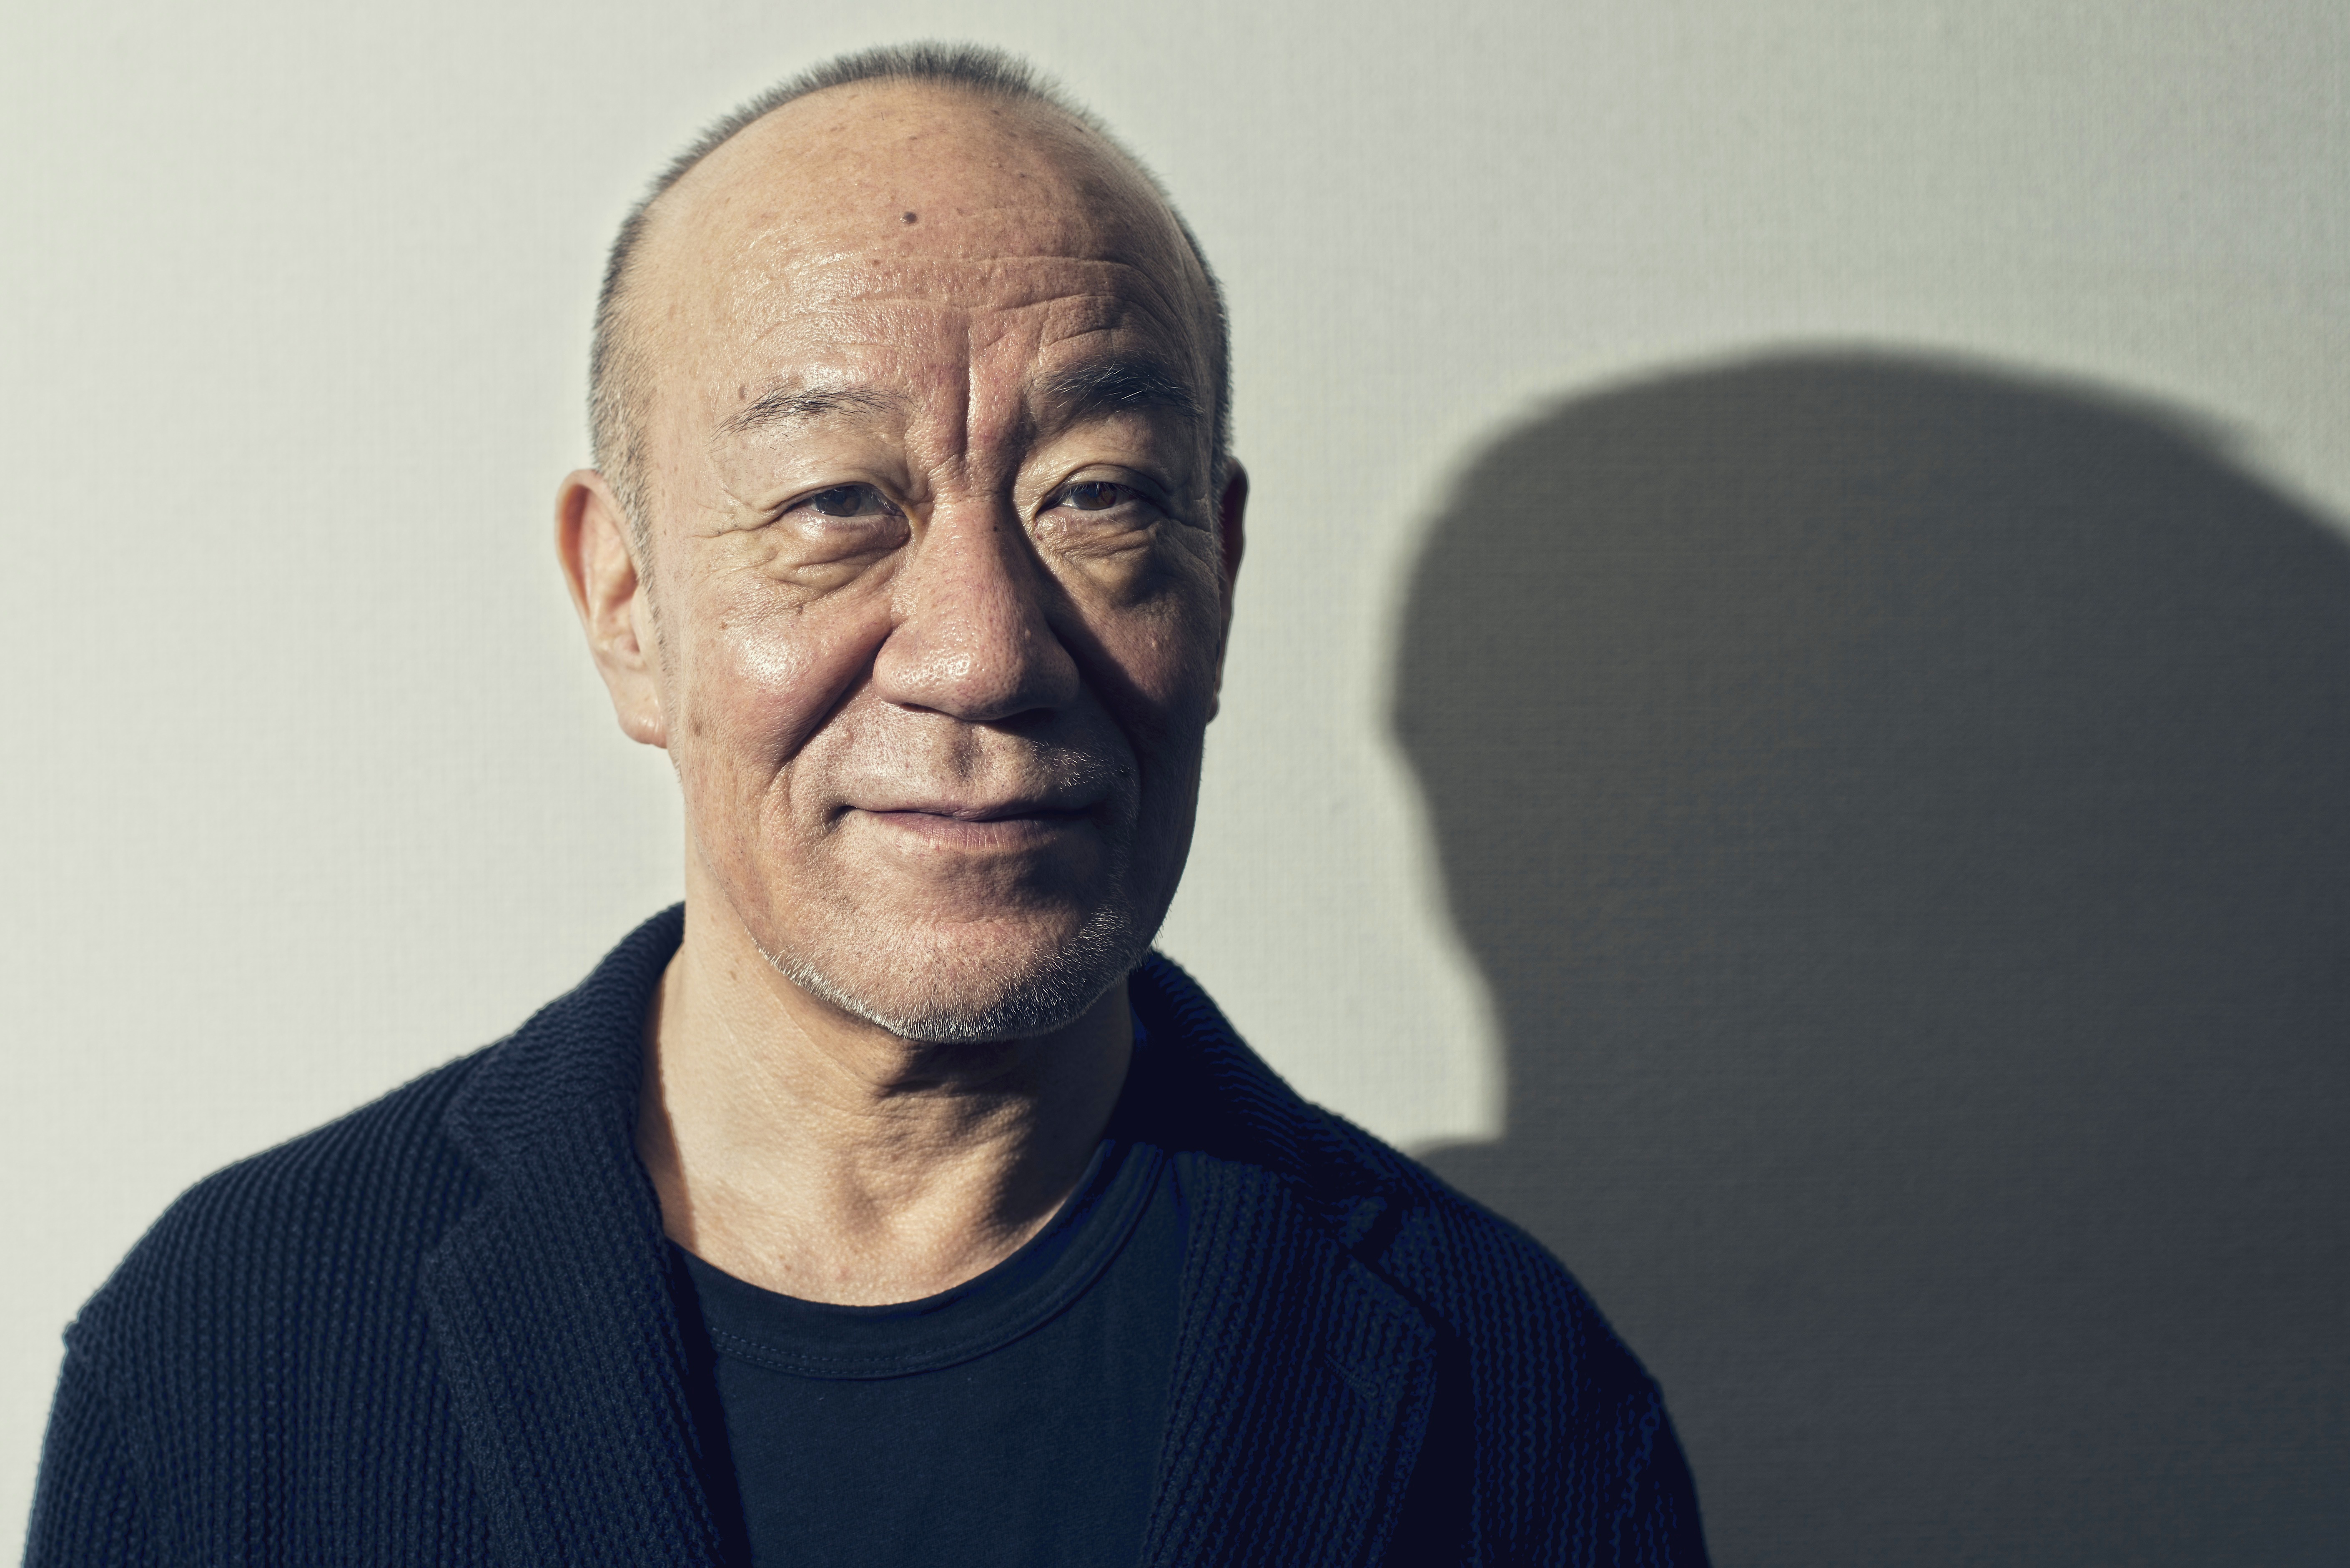 Composers Joe Hisaishi and Philip Glass team up for a special performance -  The Japan Times